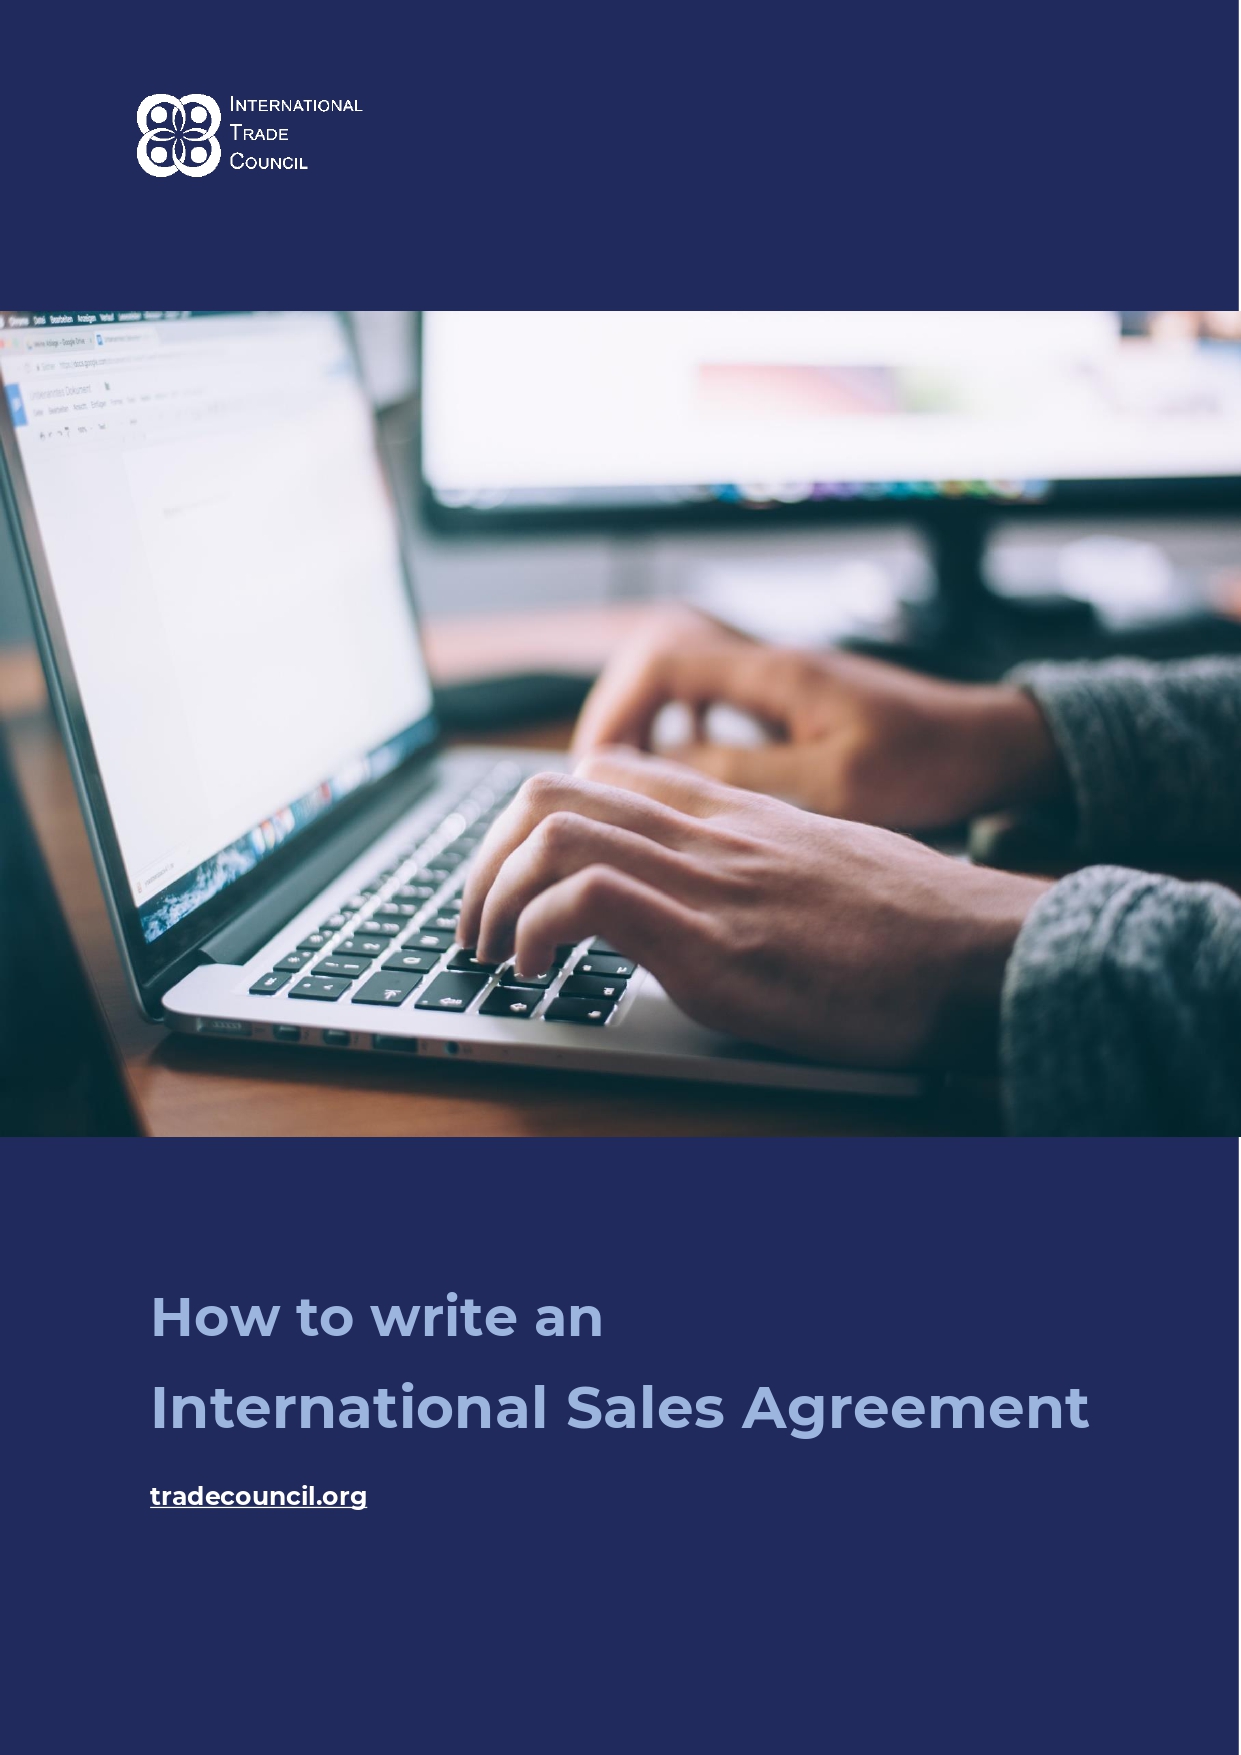 How to write an international sales agreement. A free publication by the International Trade Council.